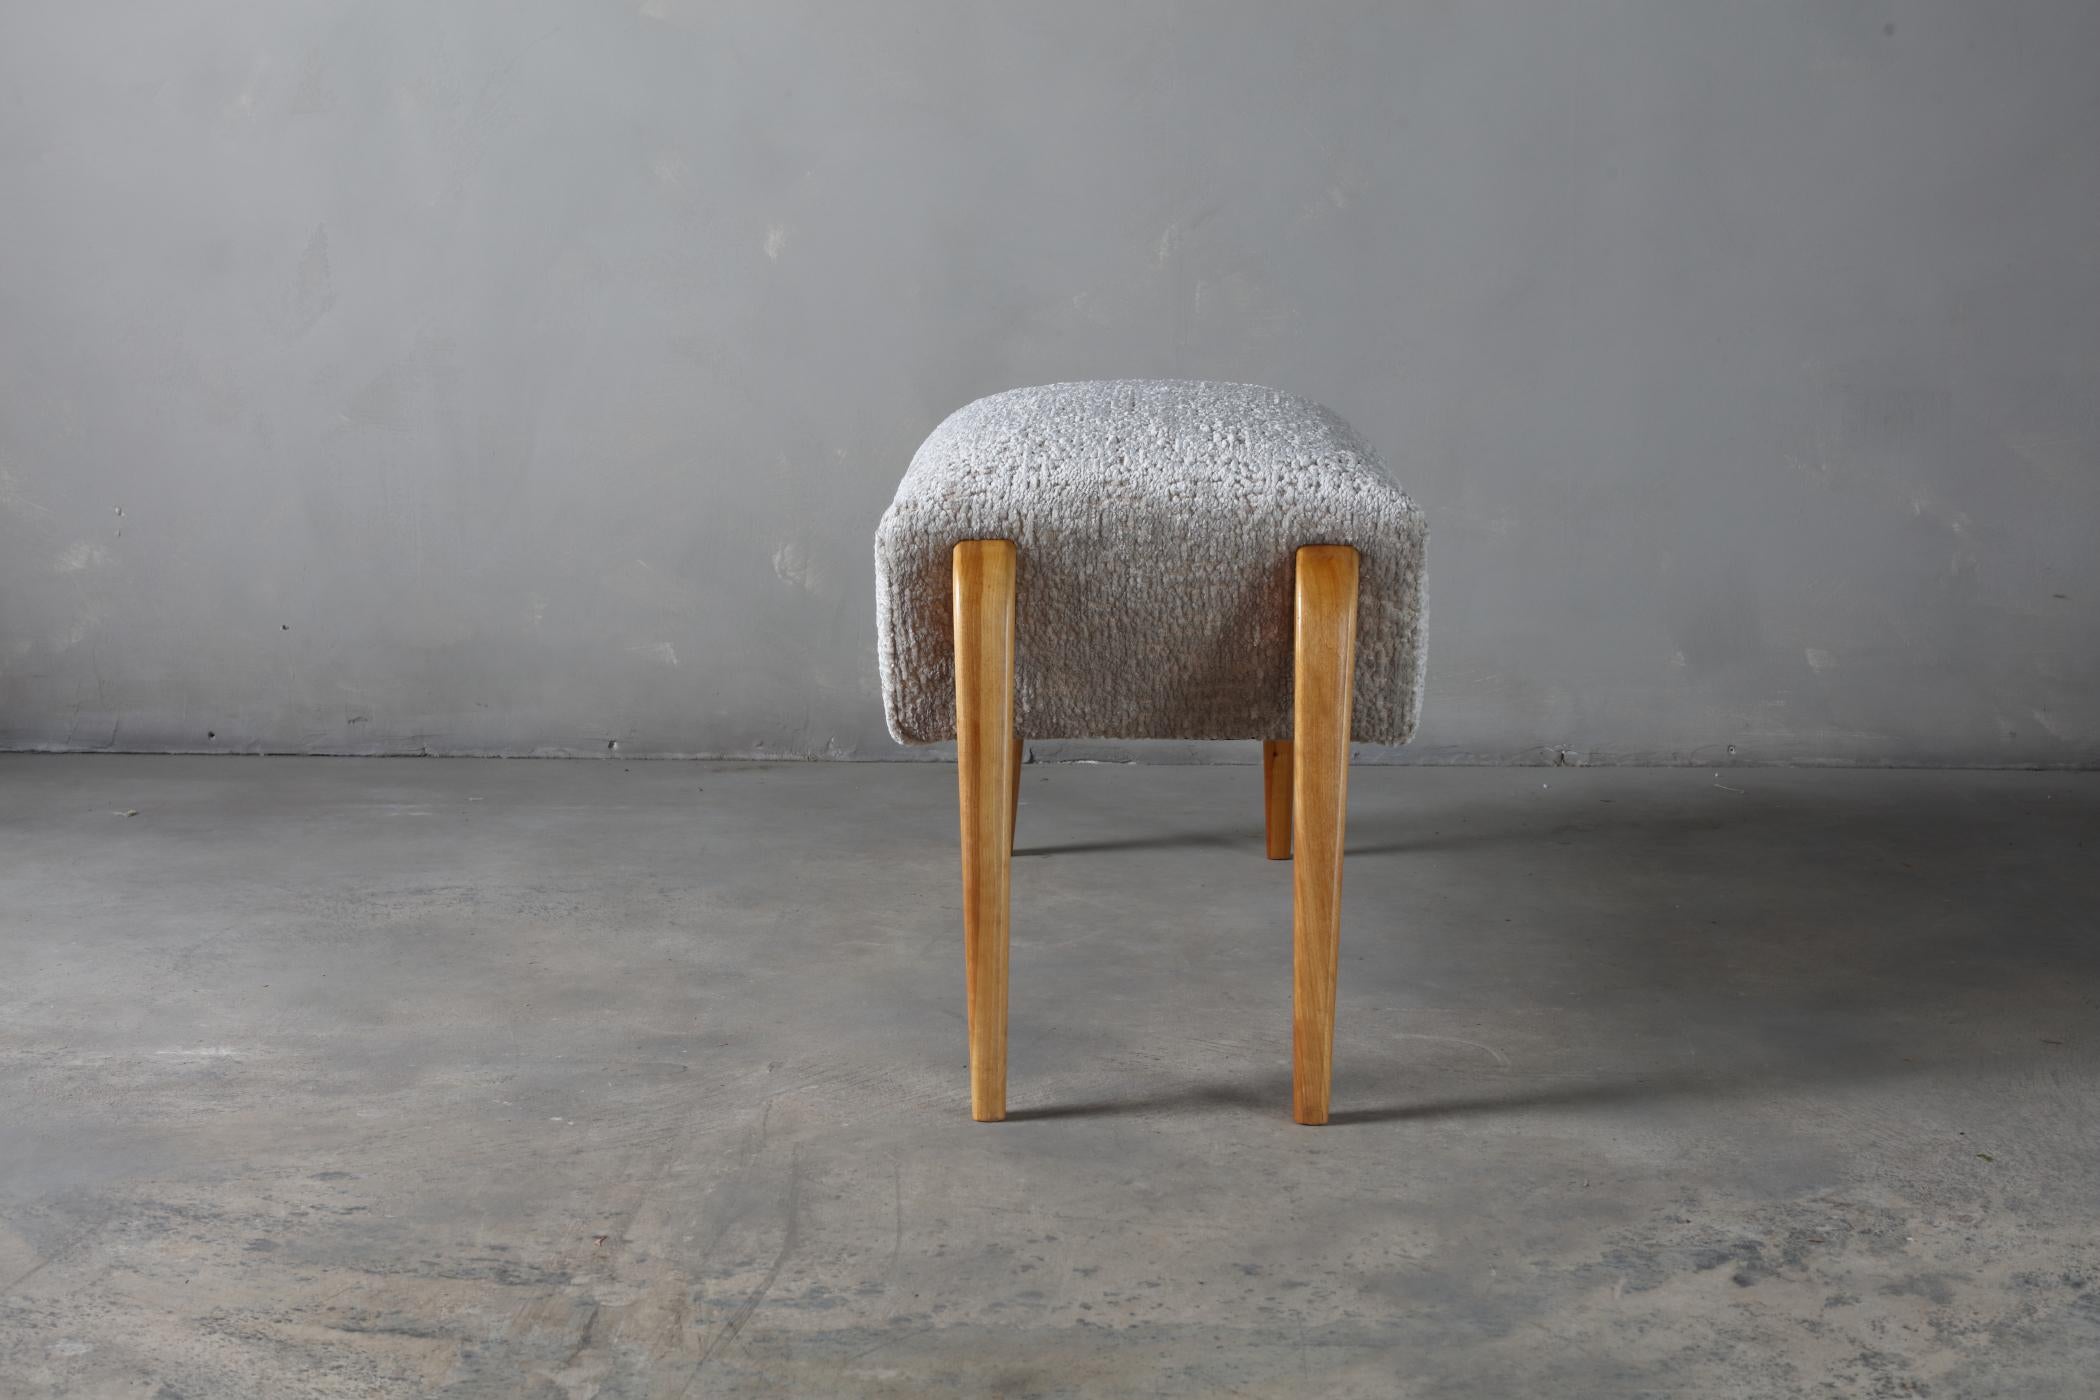 Teak functionalist stool, Sweden 1950s. Unique sculptural organic shape and textured fabric. Minor wear consistent with age and history.